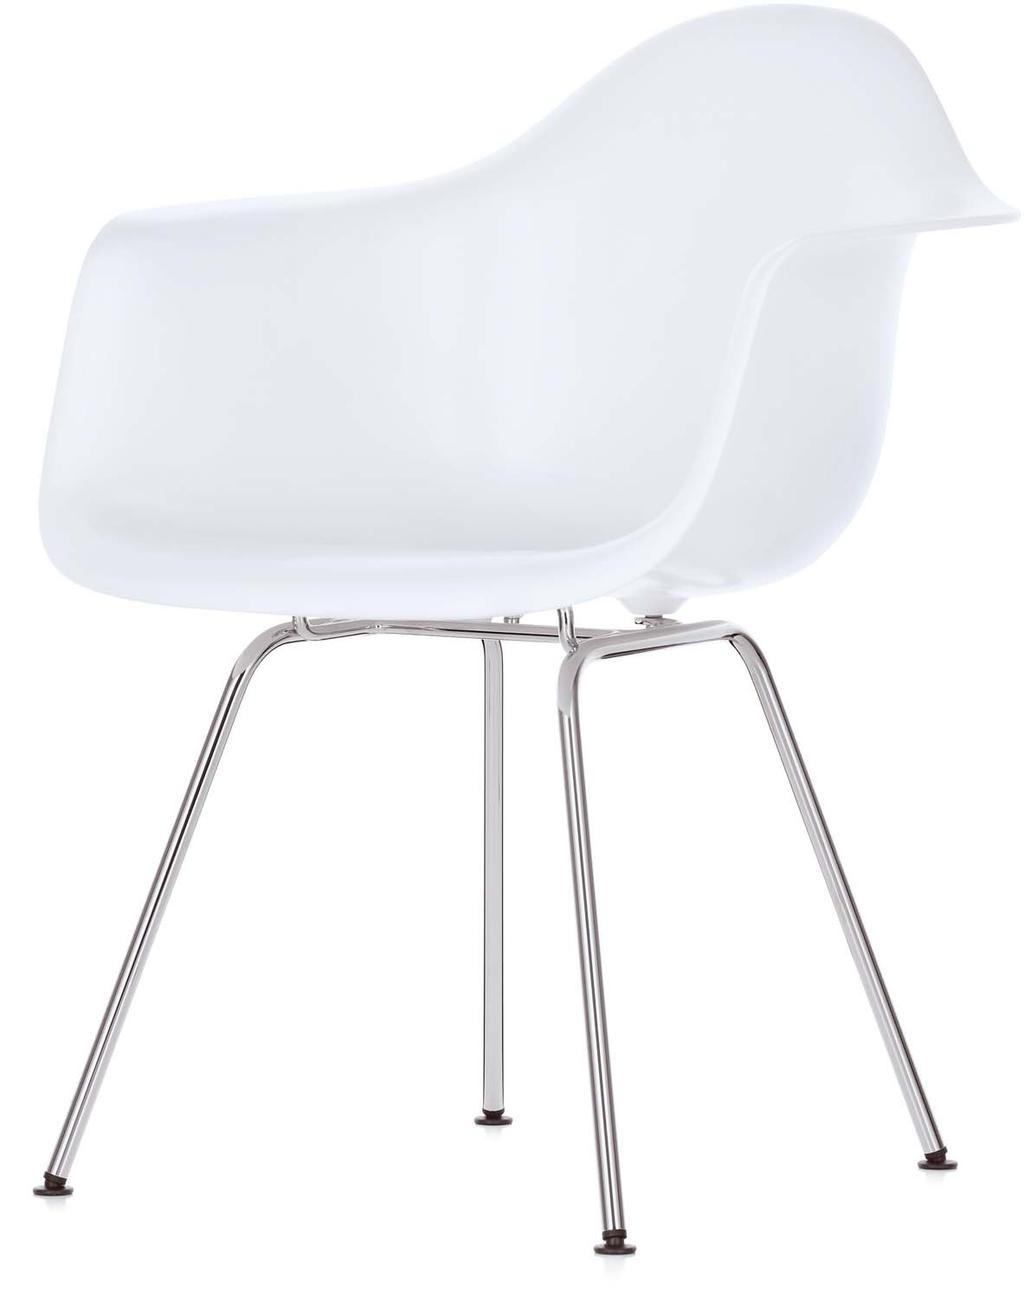 The Eames Plastic Armchair is available once again.